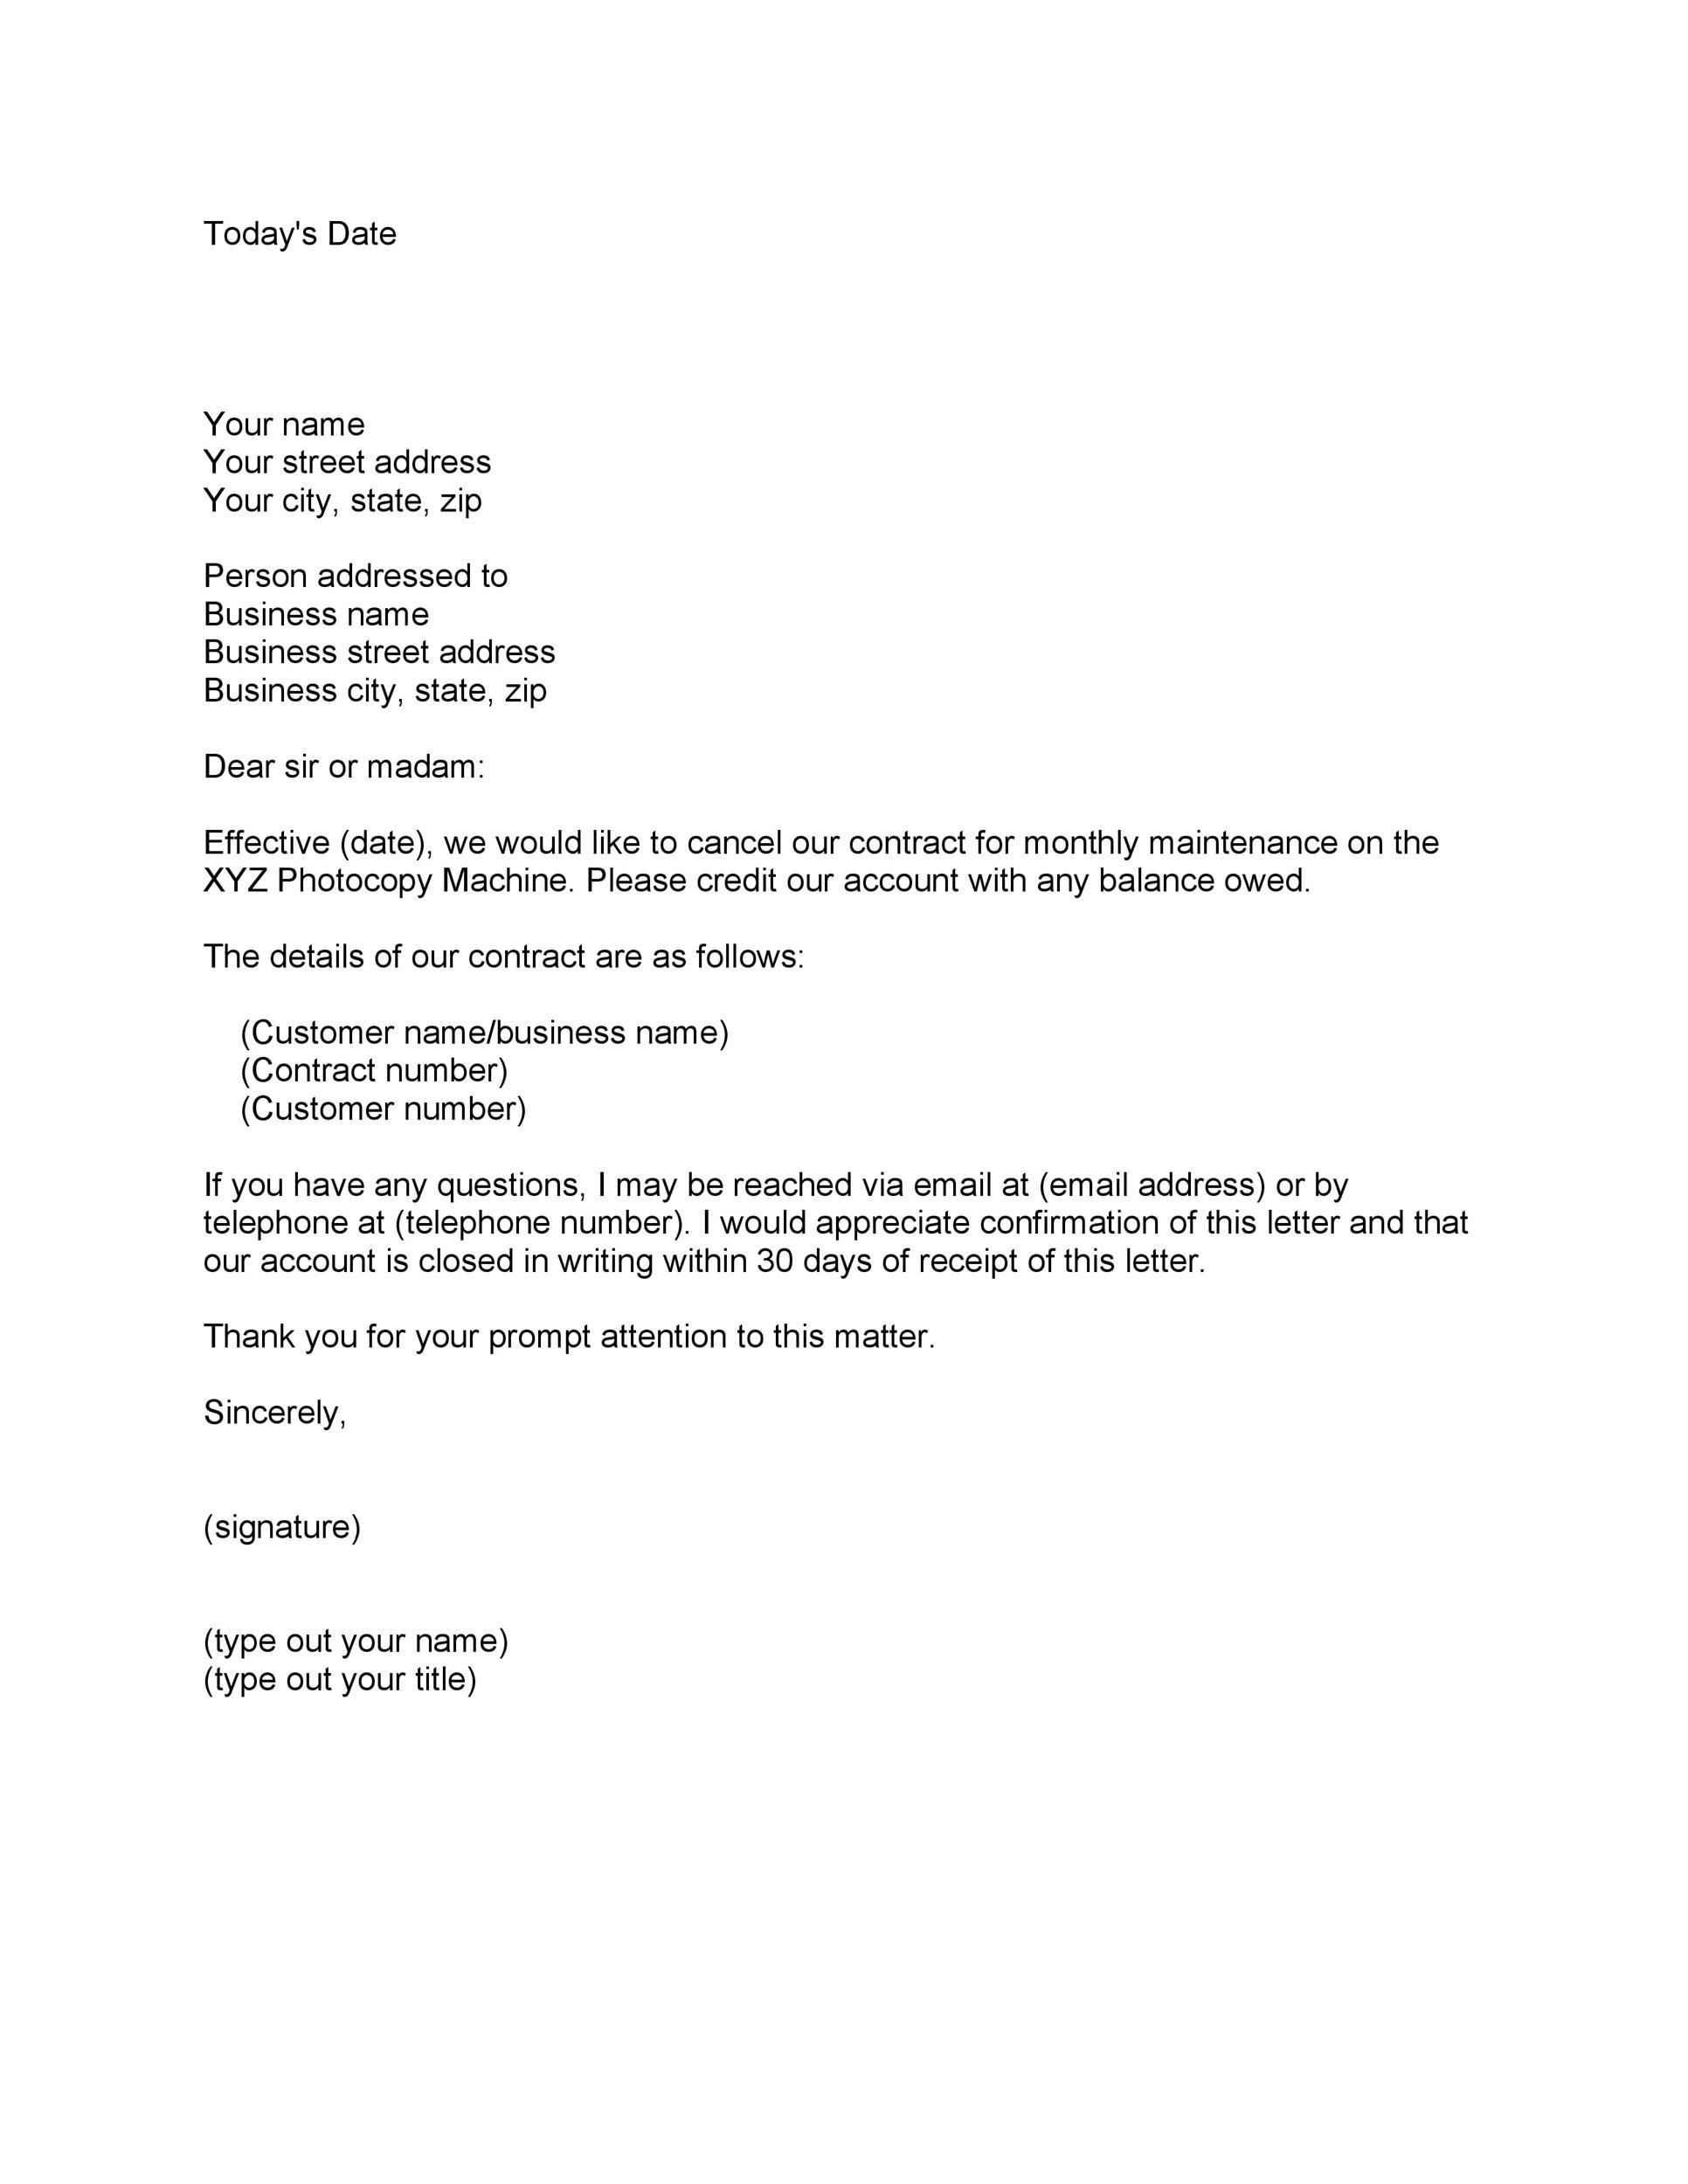 Fitness Club Cancellation Letter from templatelab.com